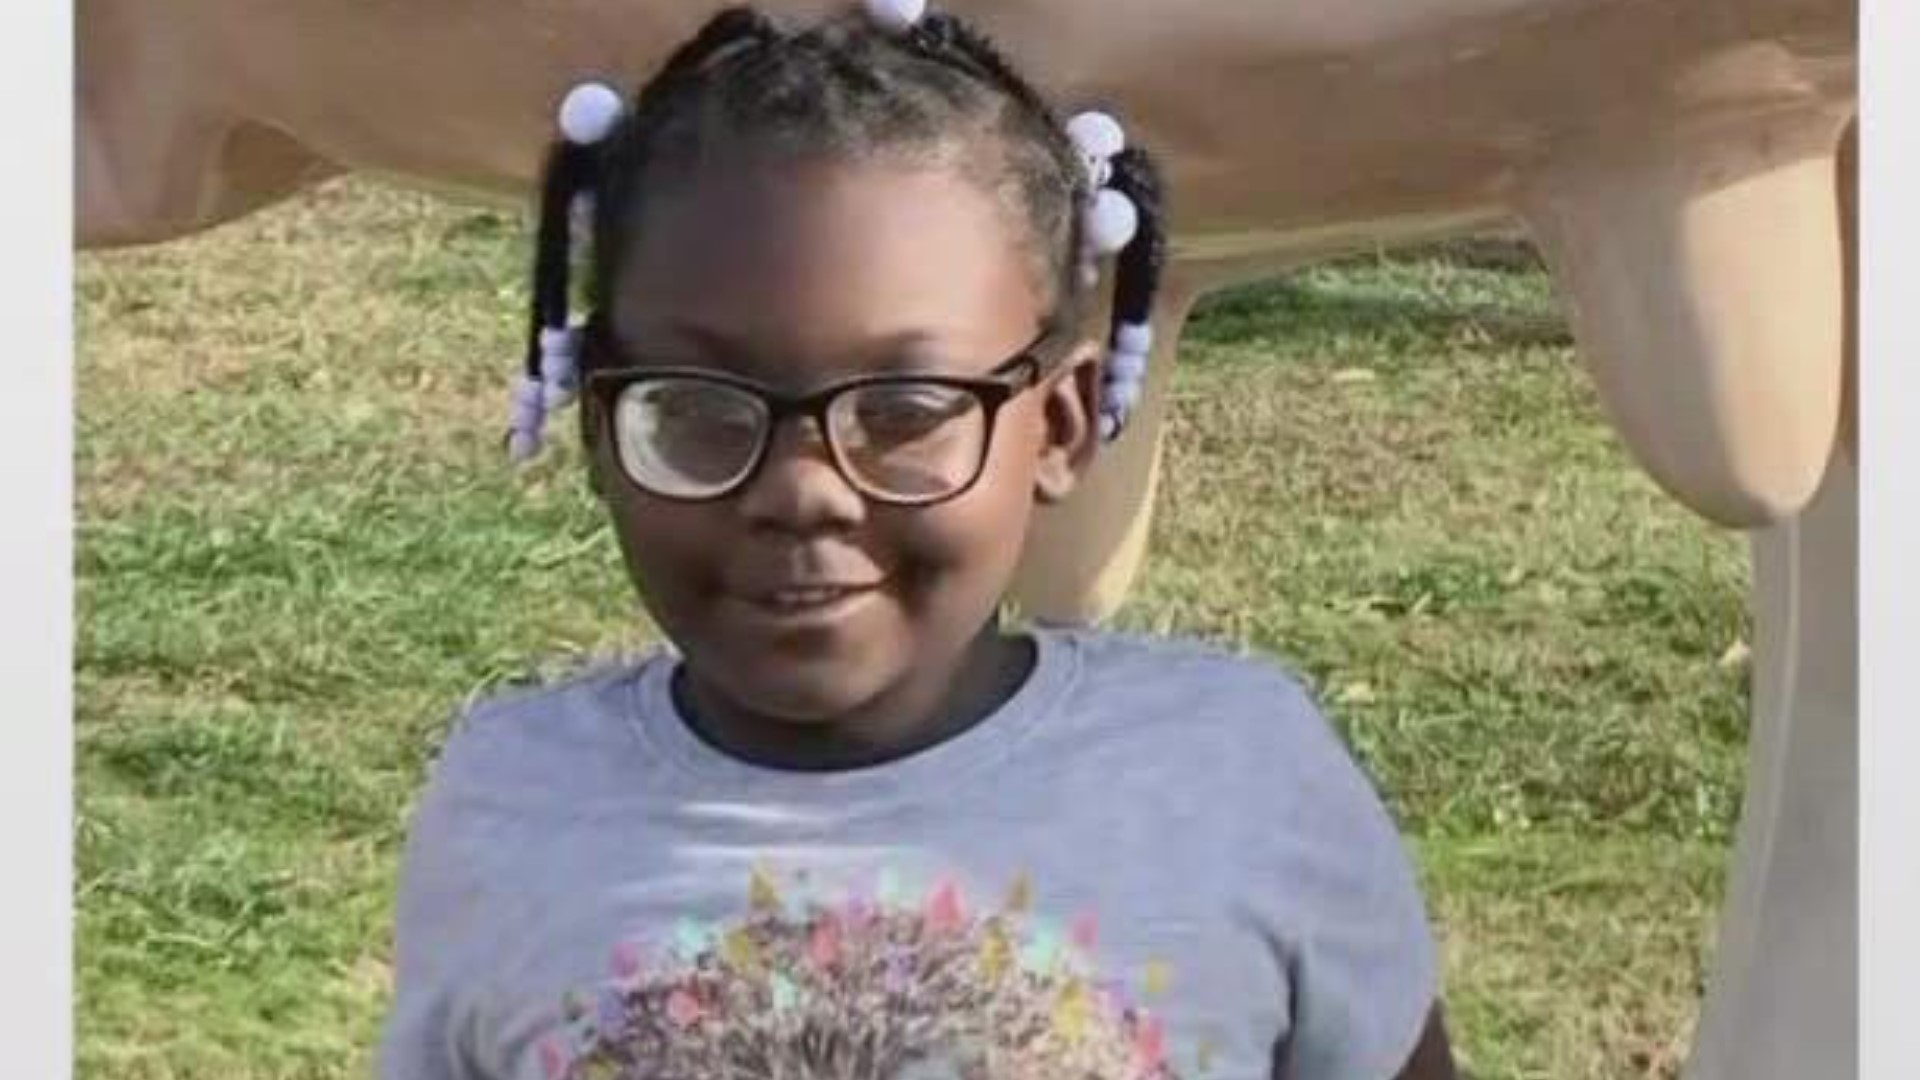 A missing 8-year-old girl out of Gwinnett County has been found dead. The child's mother and her partner will face charges in the case, according to police.